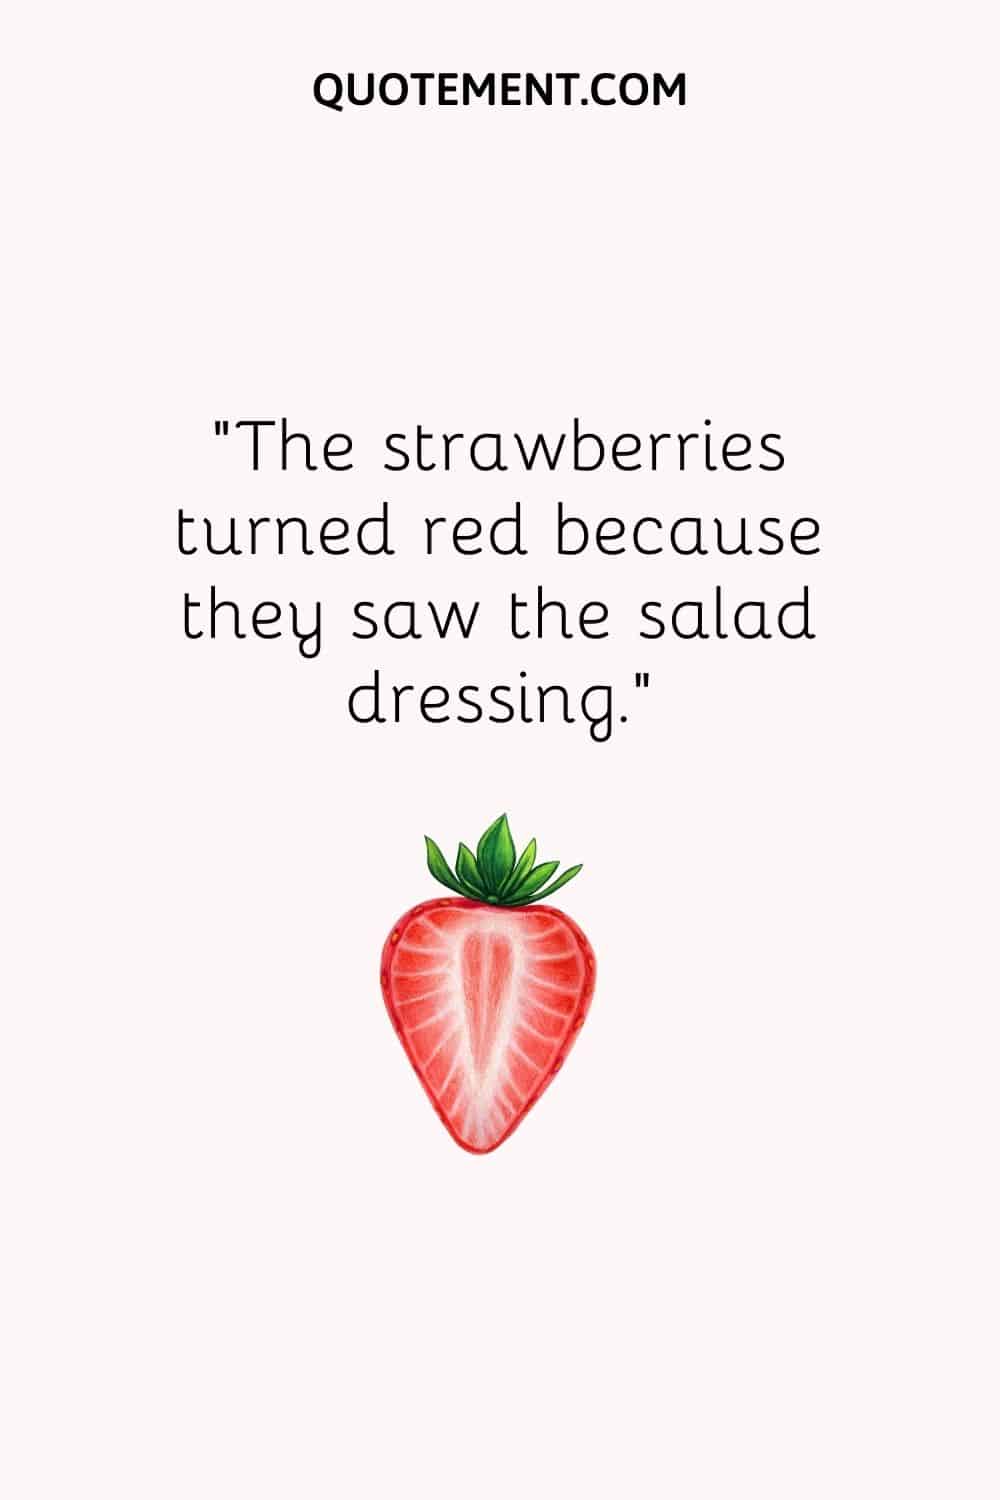 The strawberries turned red because they saw the salad dressing